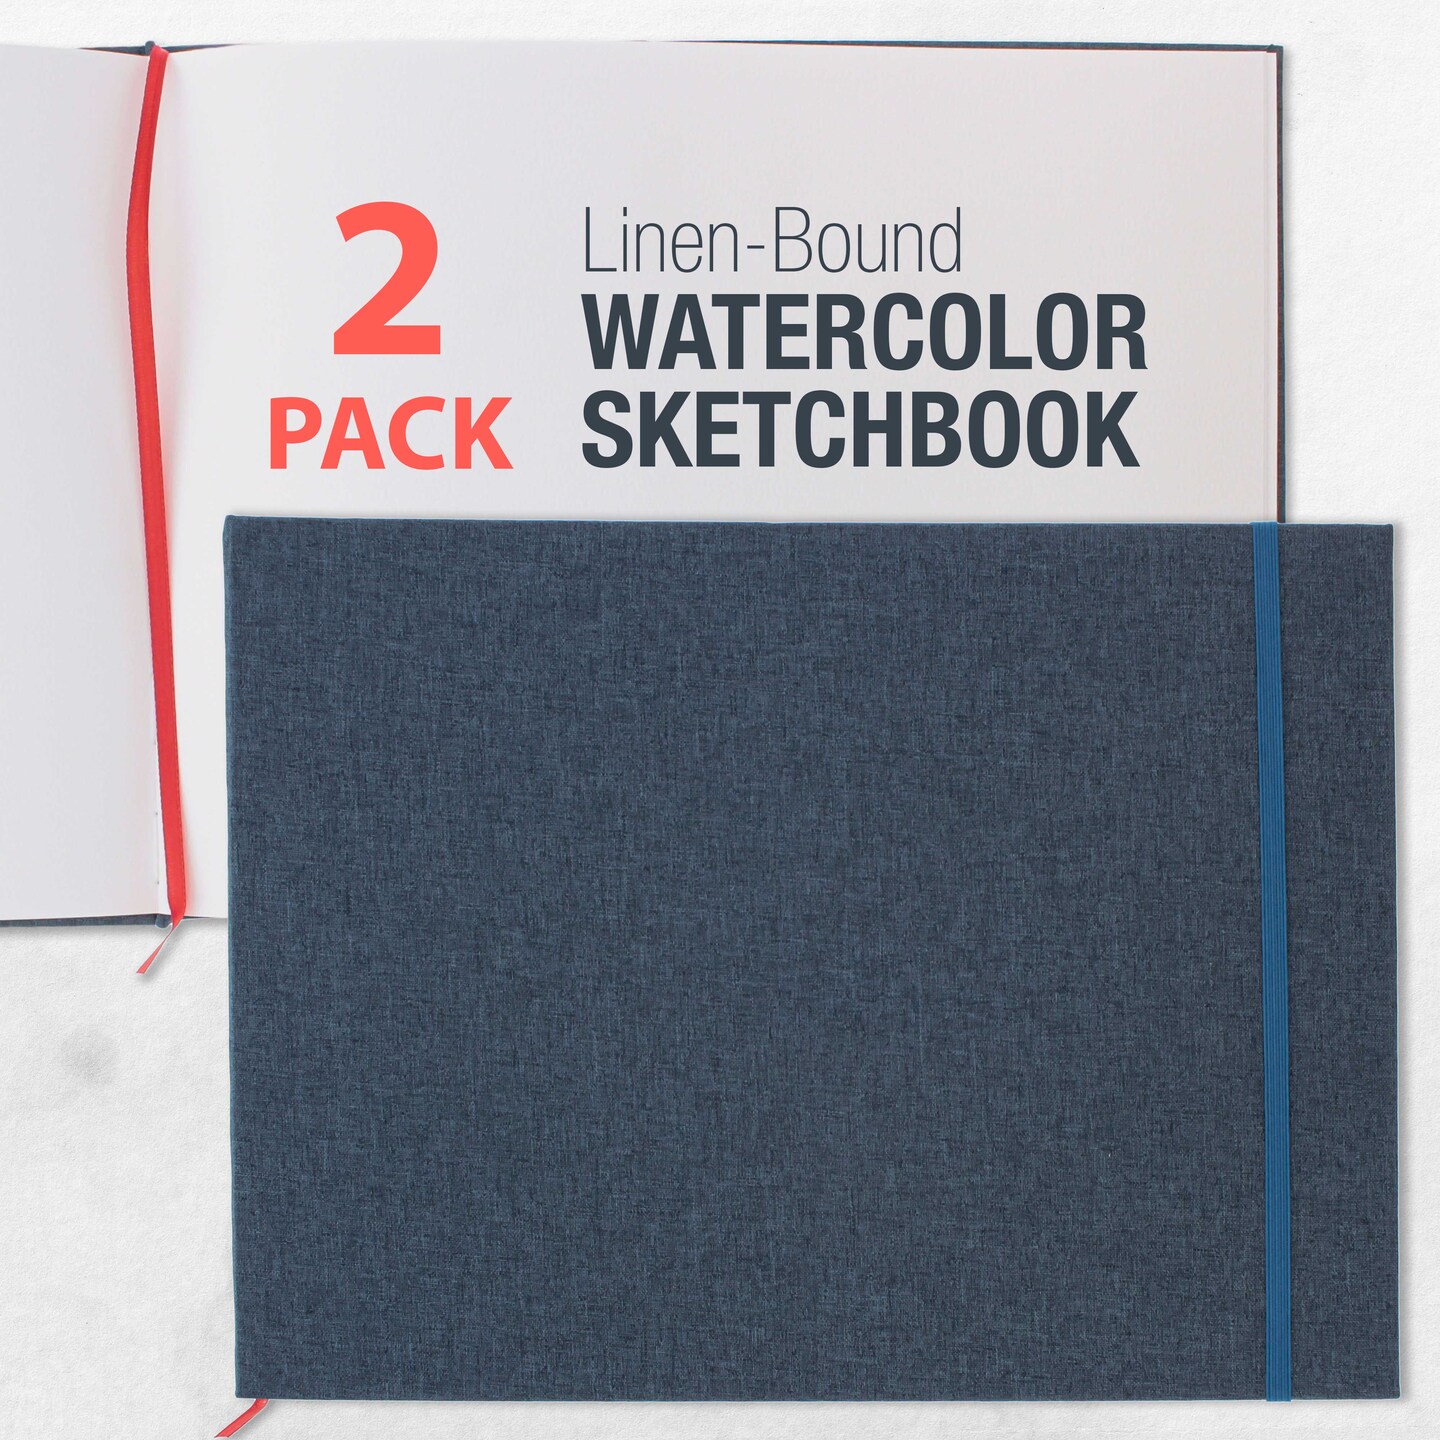 U.S. Art Supply 9&#x22; x 12&#x22; Watercolor Book, 2 Pack, 76 Sheets, 110 lb - Linen-Bound Hardcover Paper Pads, Acid-Free, Cold-Pressed Painting Sketchbook